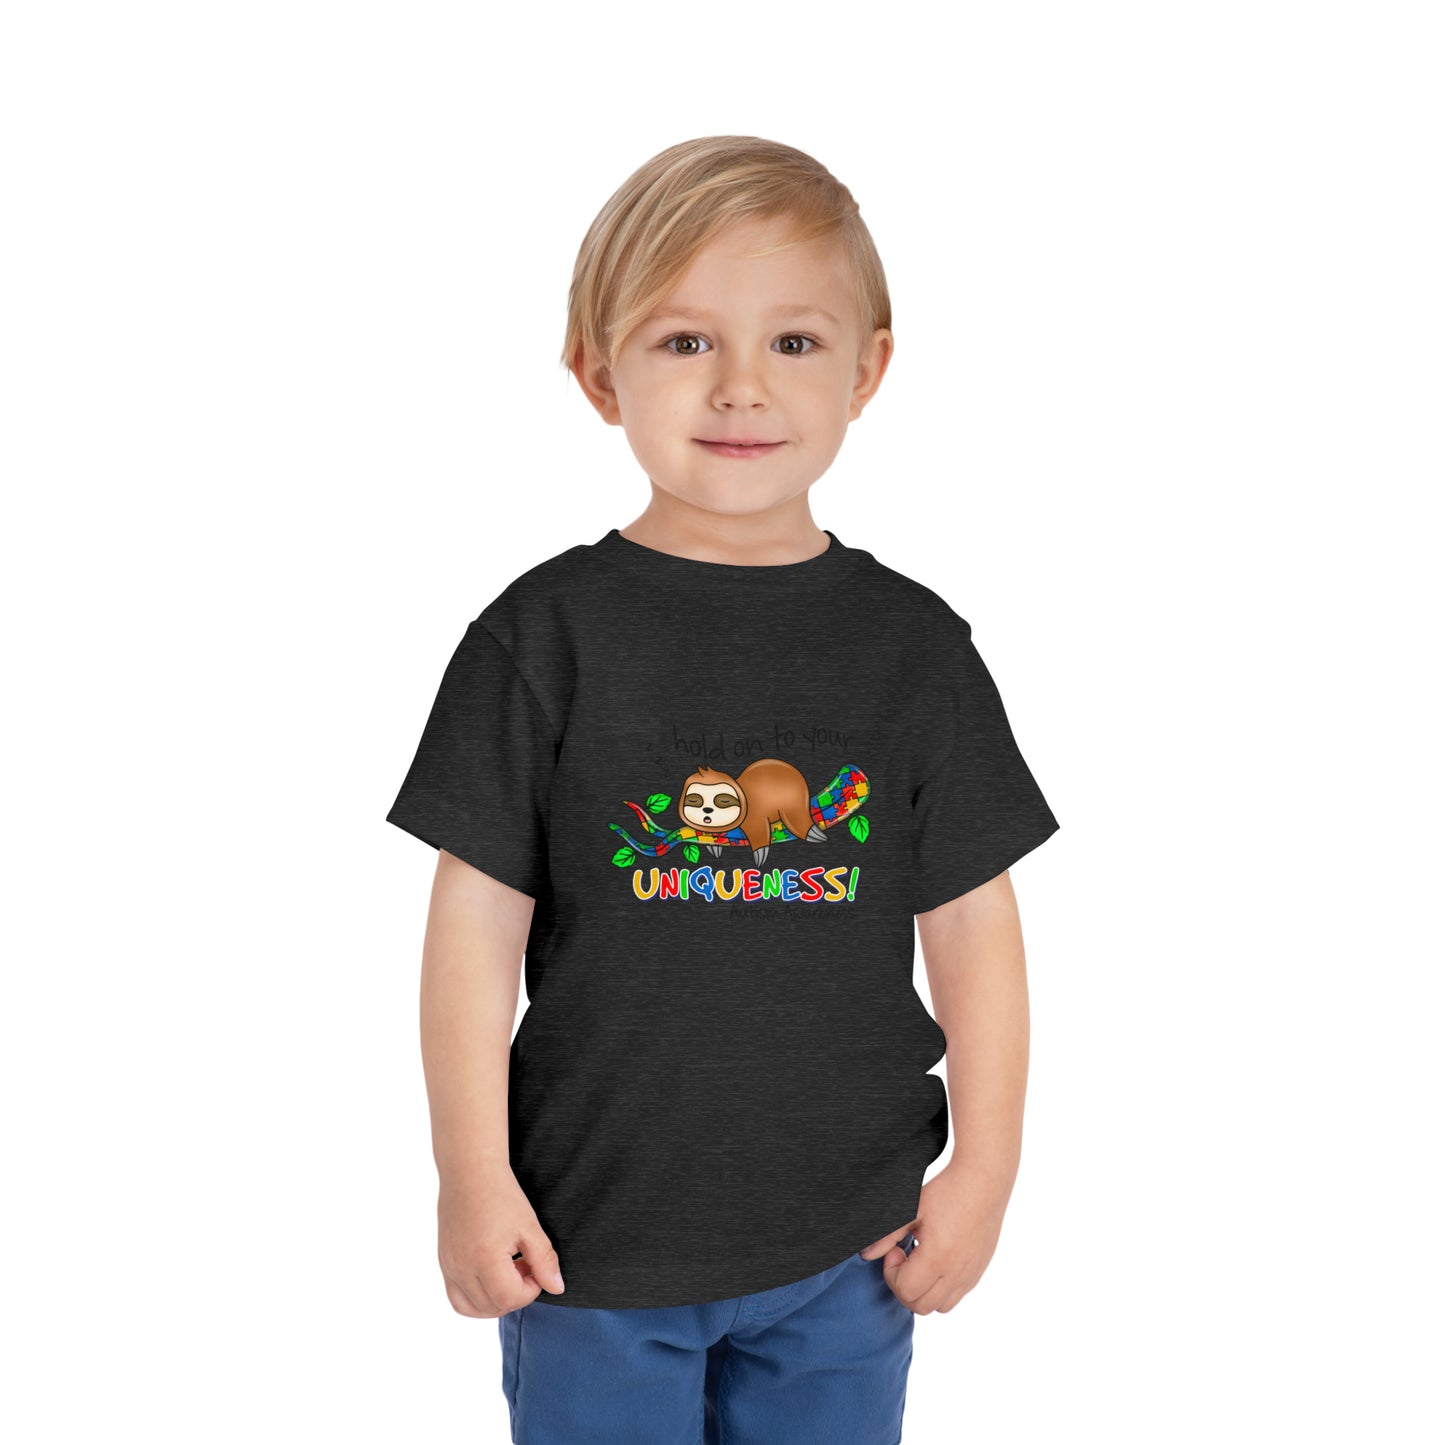 Hold on to your uniqueness Autism Awareness Advocate Toddler Short Sleeve Tee